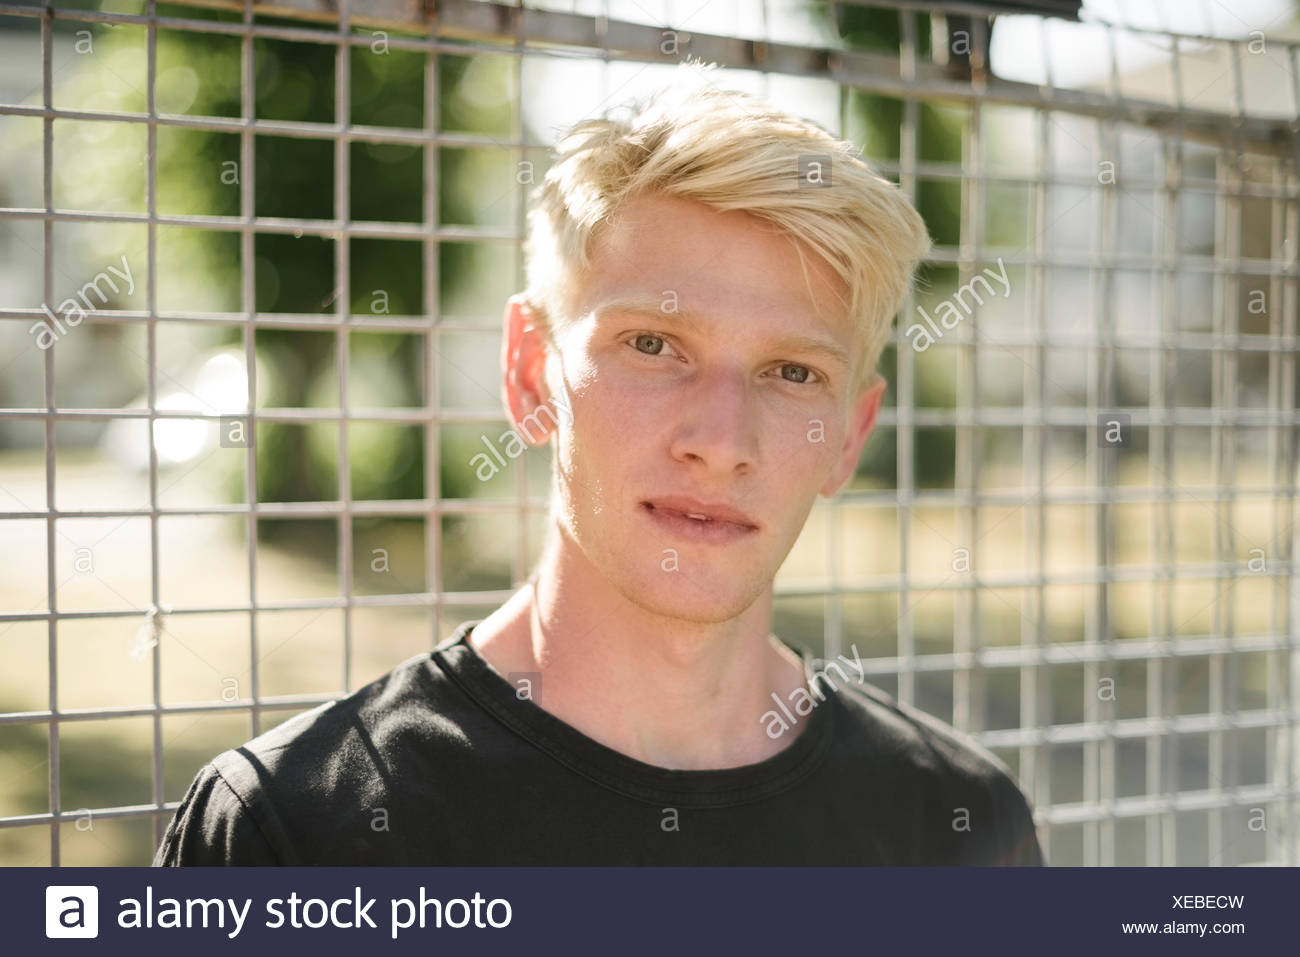 Portrait Of Blond Haired Young Man By Wire Fence Stock Photo